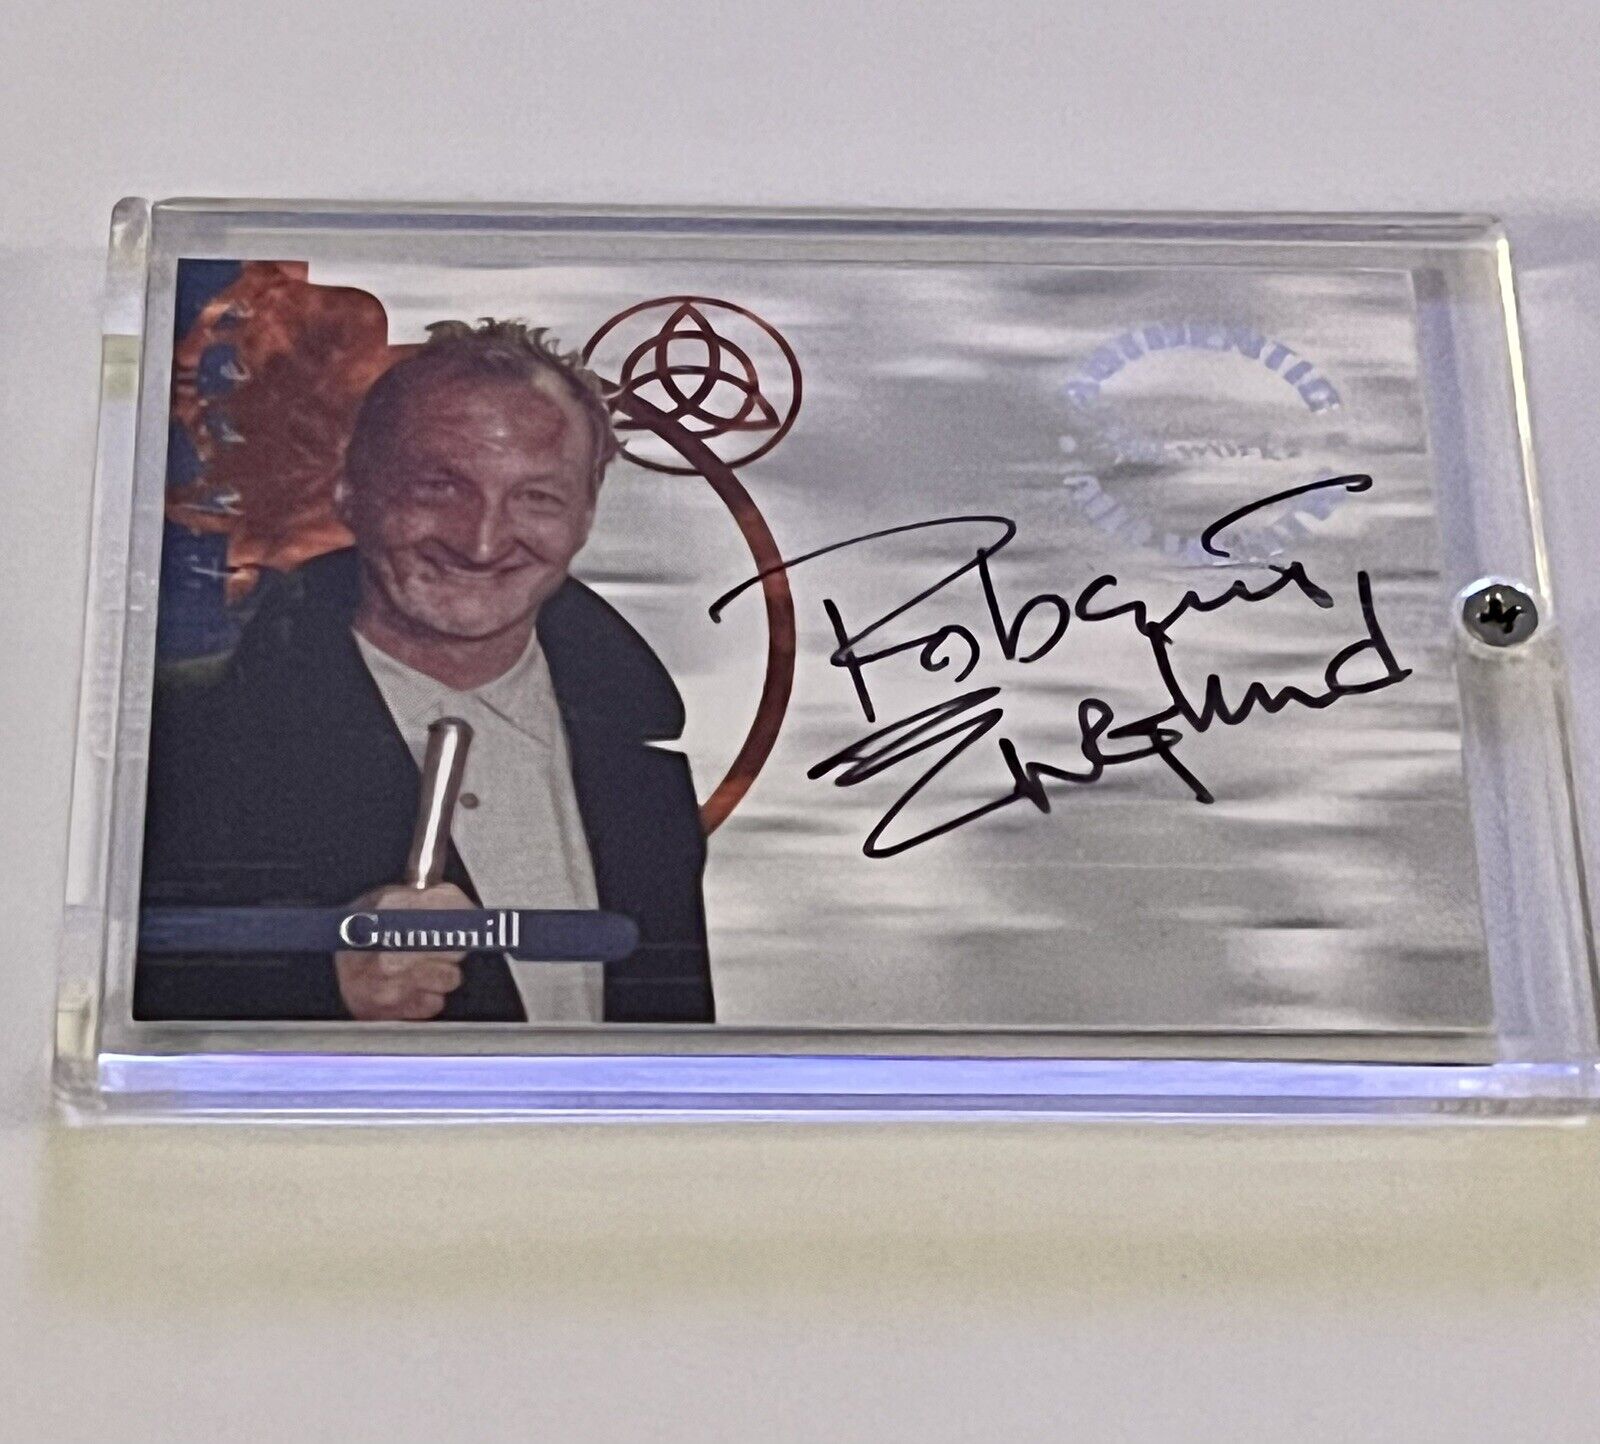 Charmed Robert Englund as Gammill Power of Three Signed A10 Card